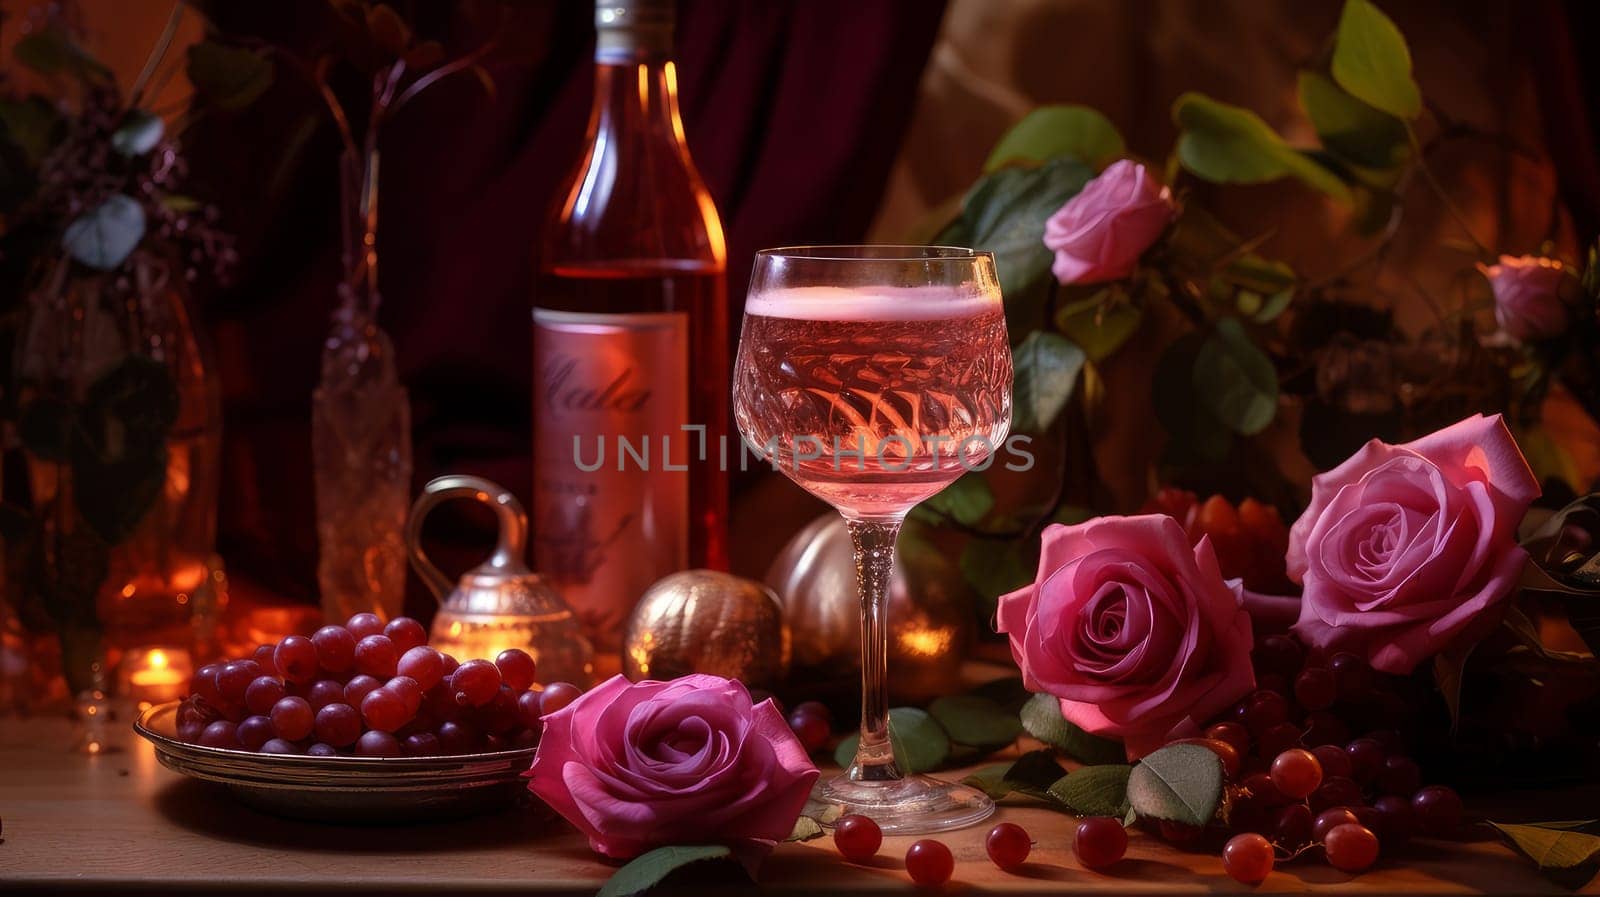 Exquisite still life with rose wine, cheese and grapes on a wicker tray on a wooden table on a dark background. Wine making, vineyards, tourism business, small and private business, chain restaurant, flavorful food and drinks